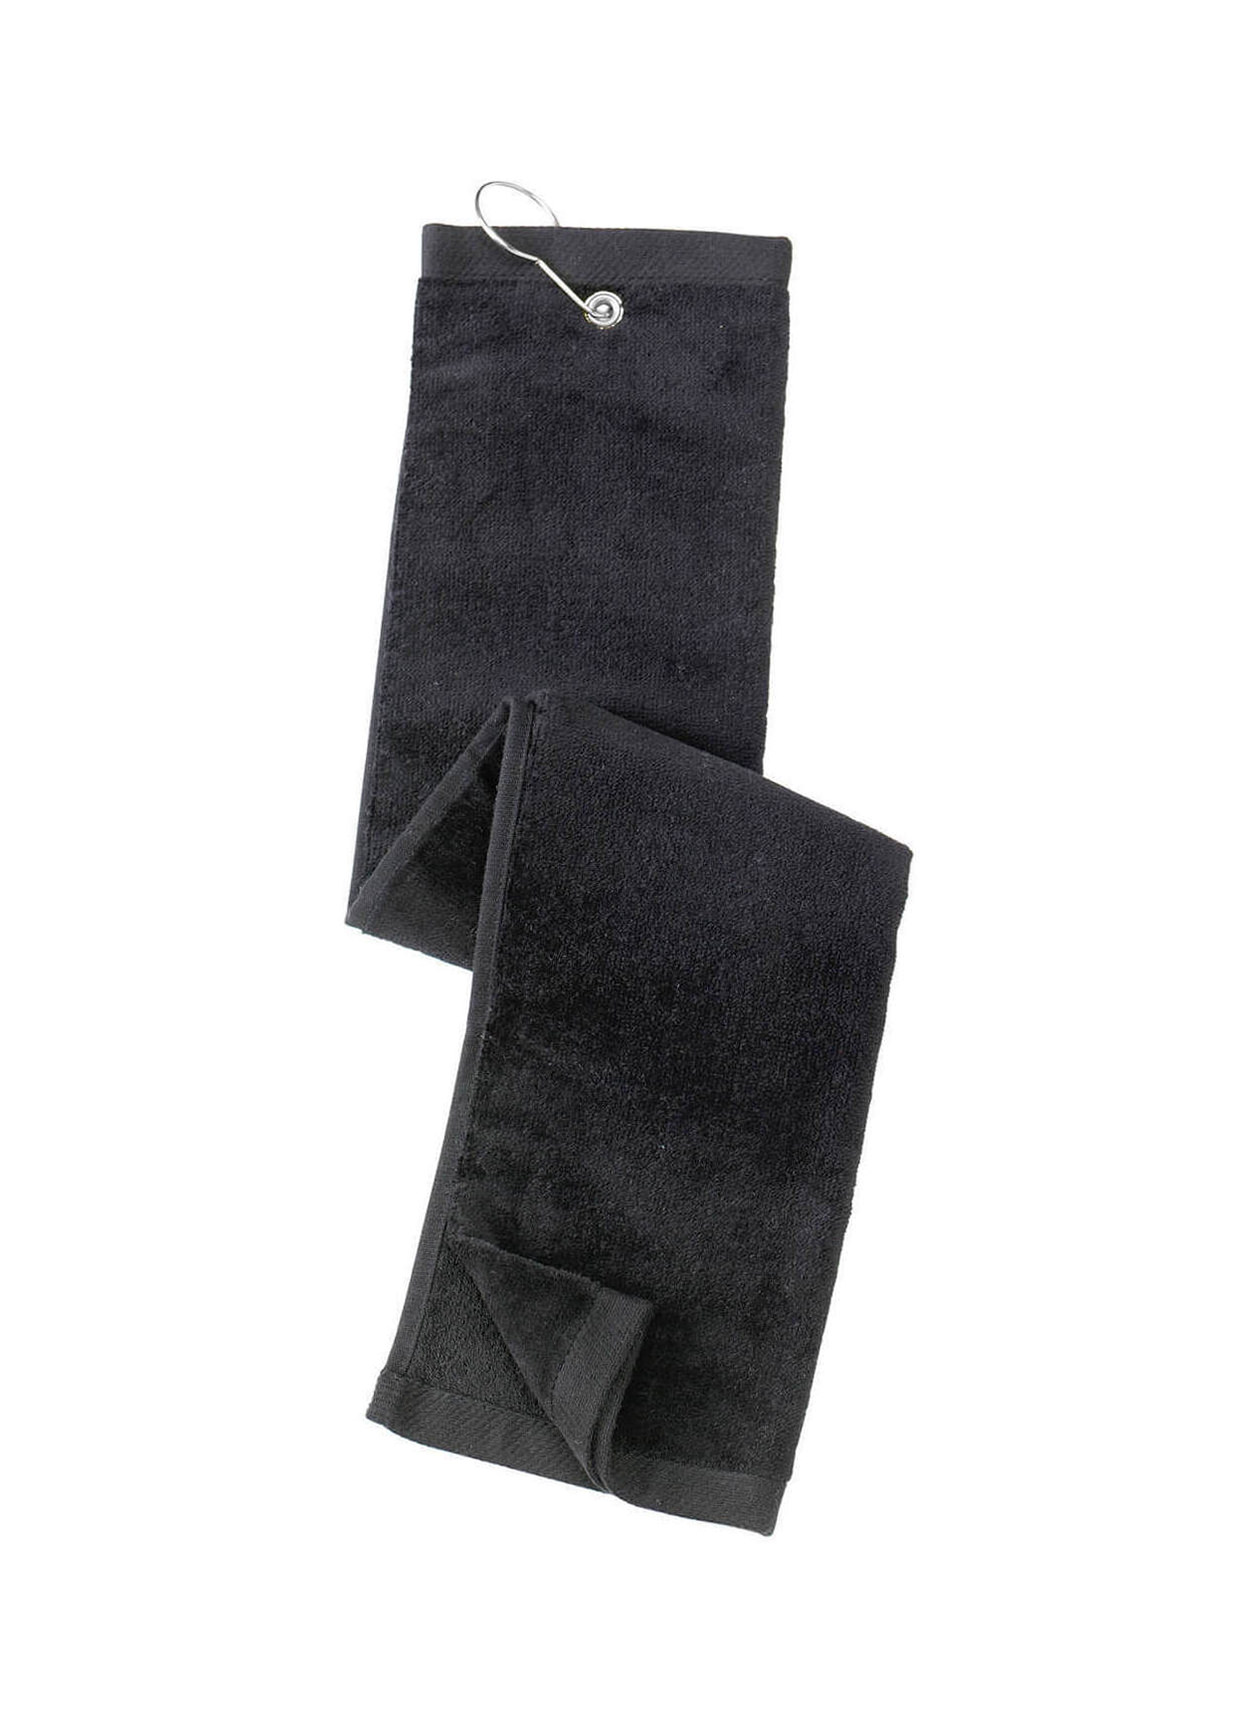 Port Authority Black Grommeted Tri-Fold Golf Towel